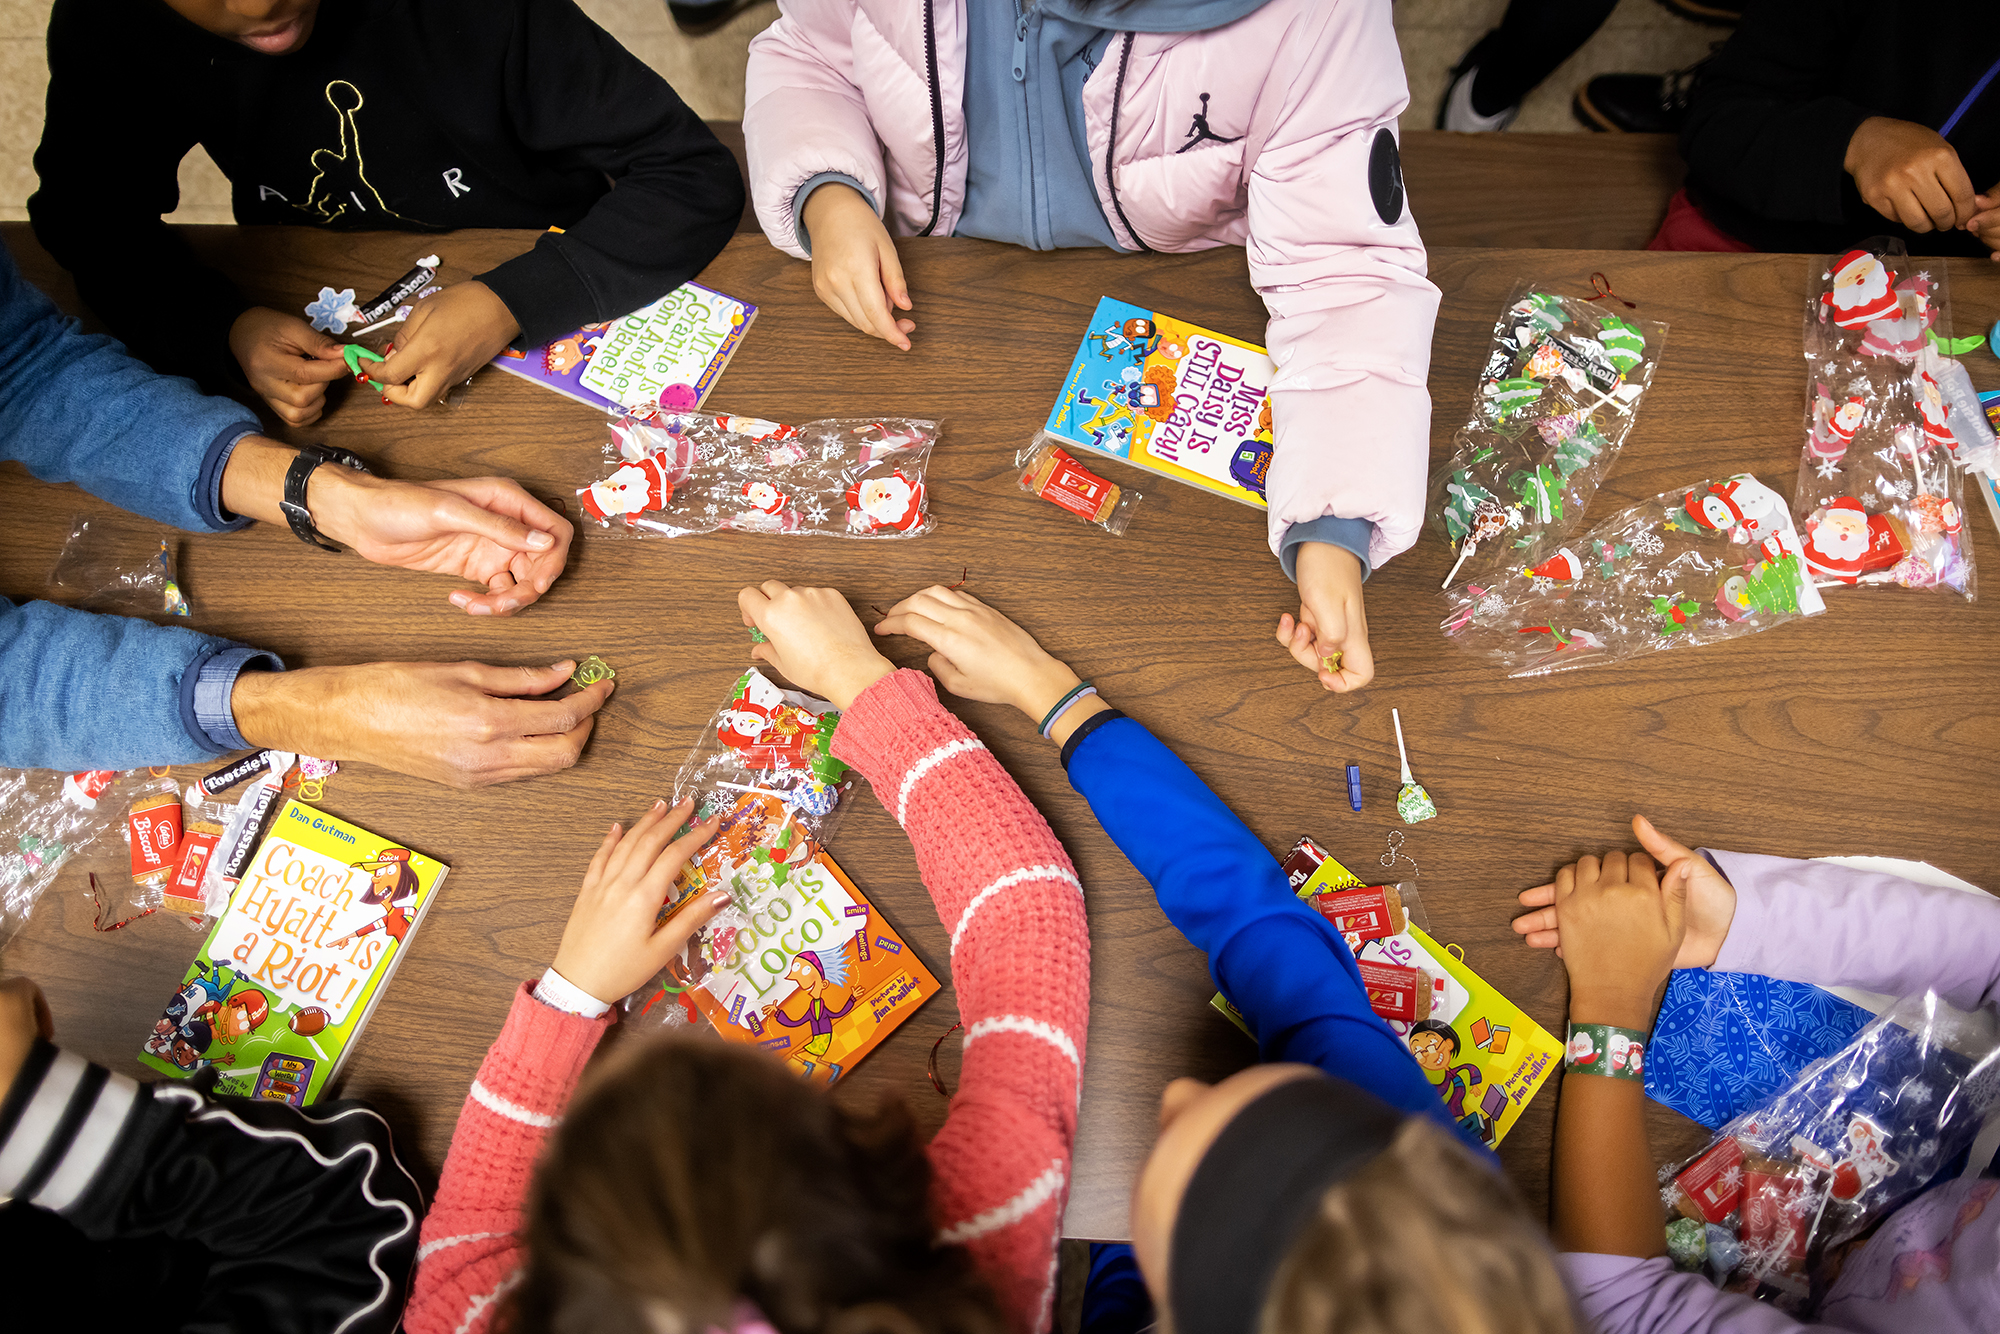 A flat shot of students' hands with books and treat bags